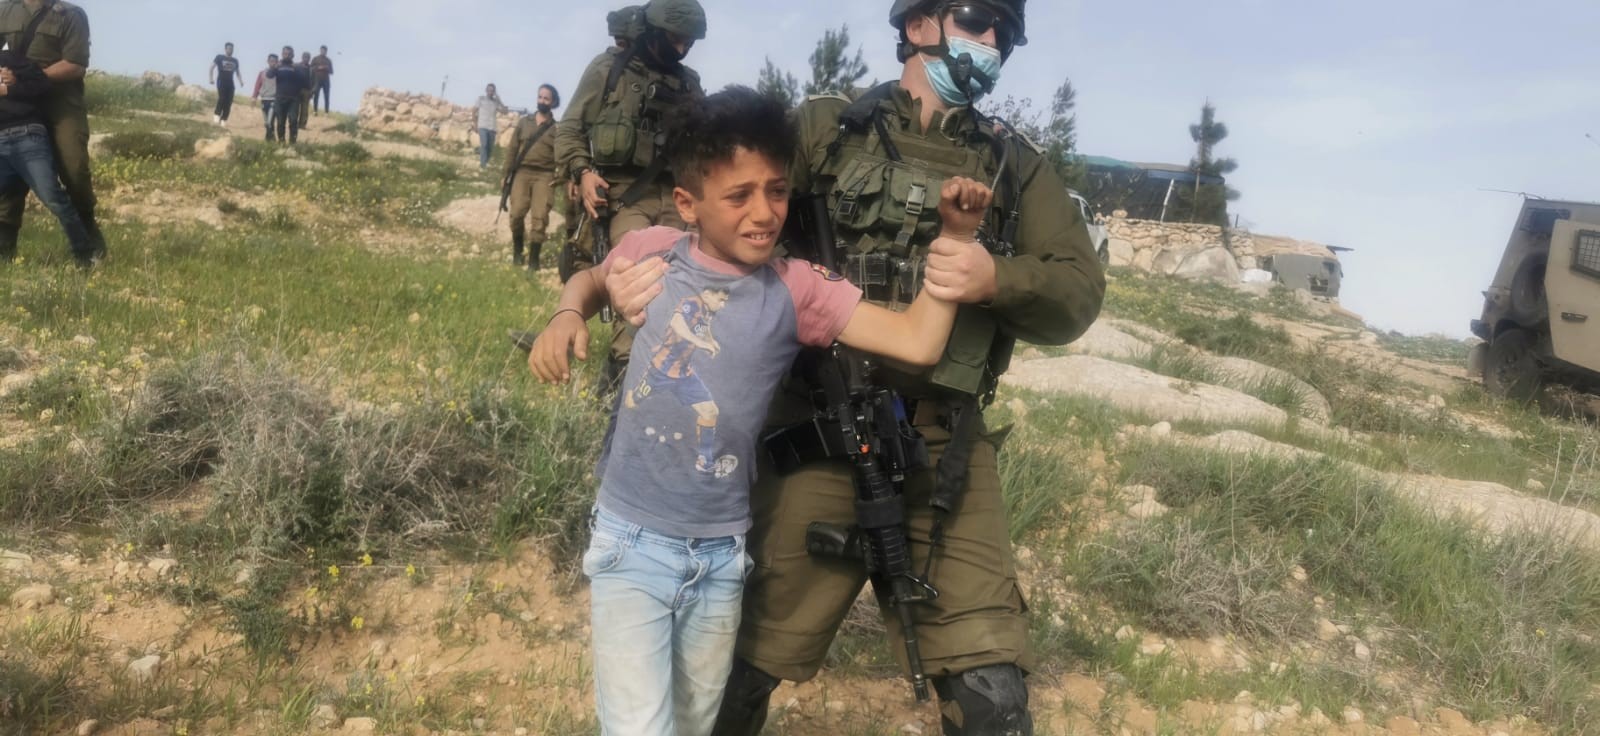 An Israeli soldier detains a Palestinian child close to al-Rakiz in the south Hebron hills, Wednesday, March 10, 2021.